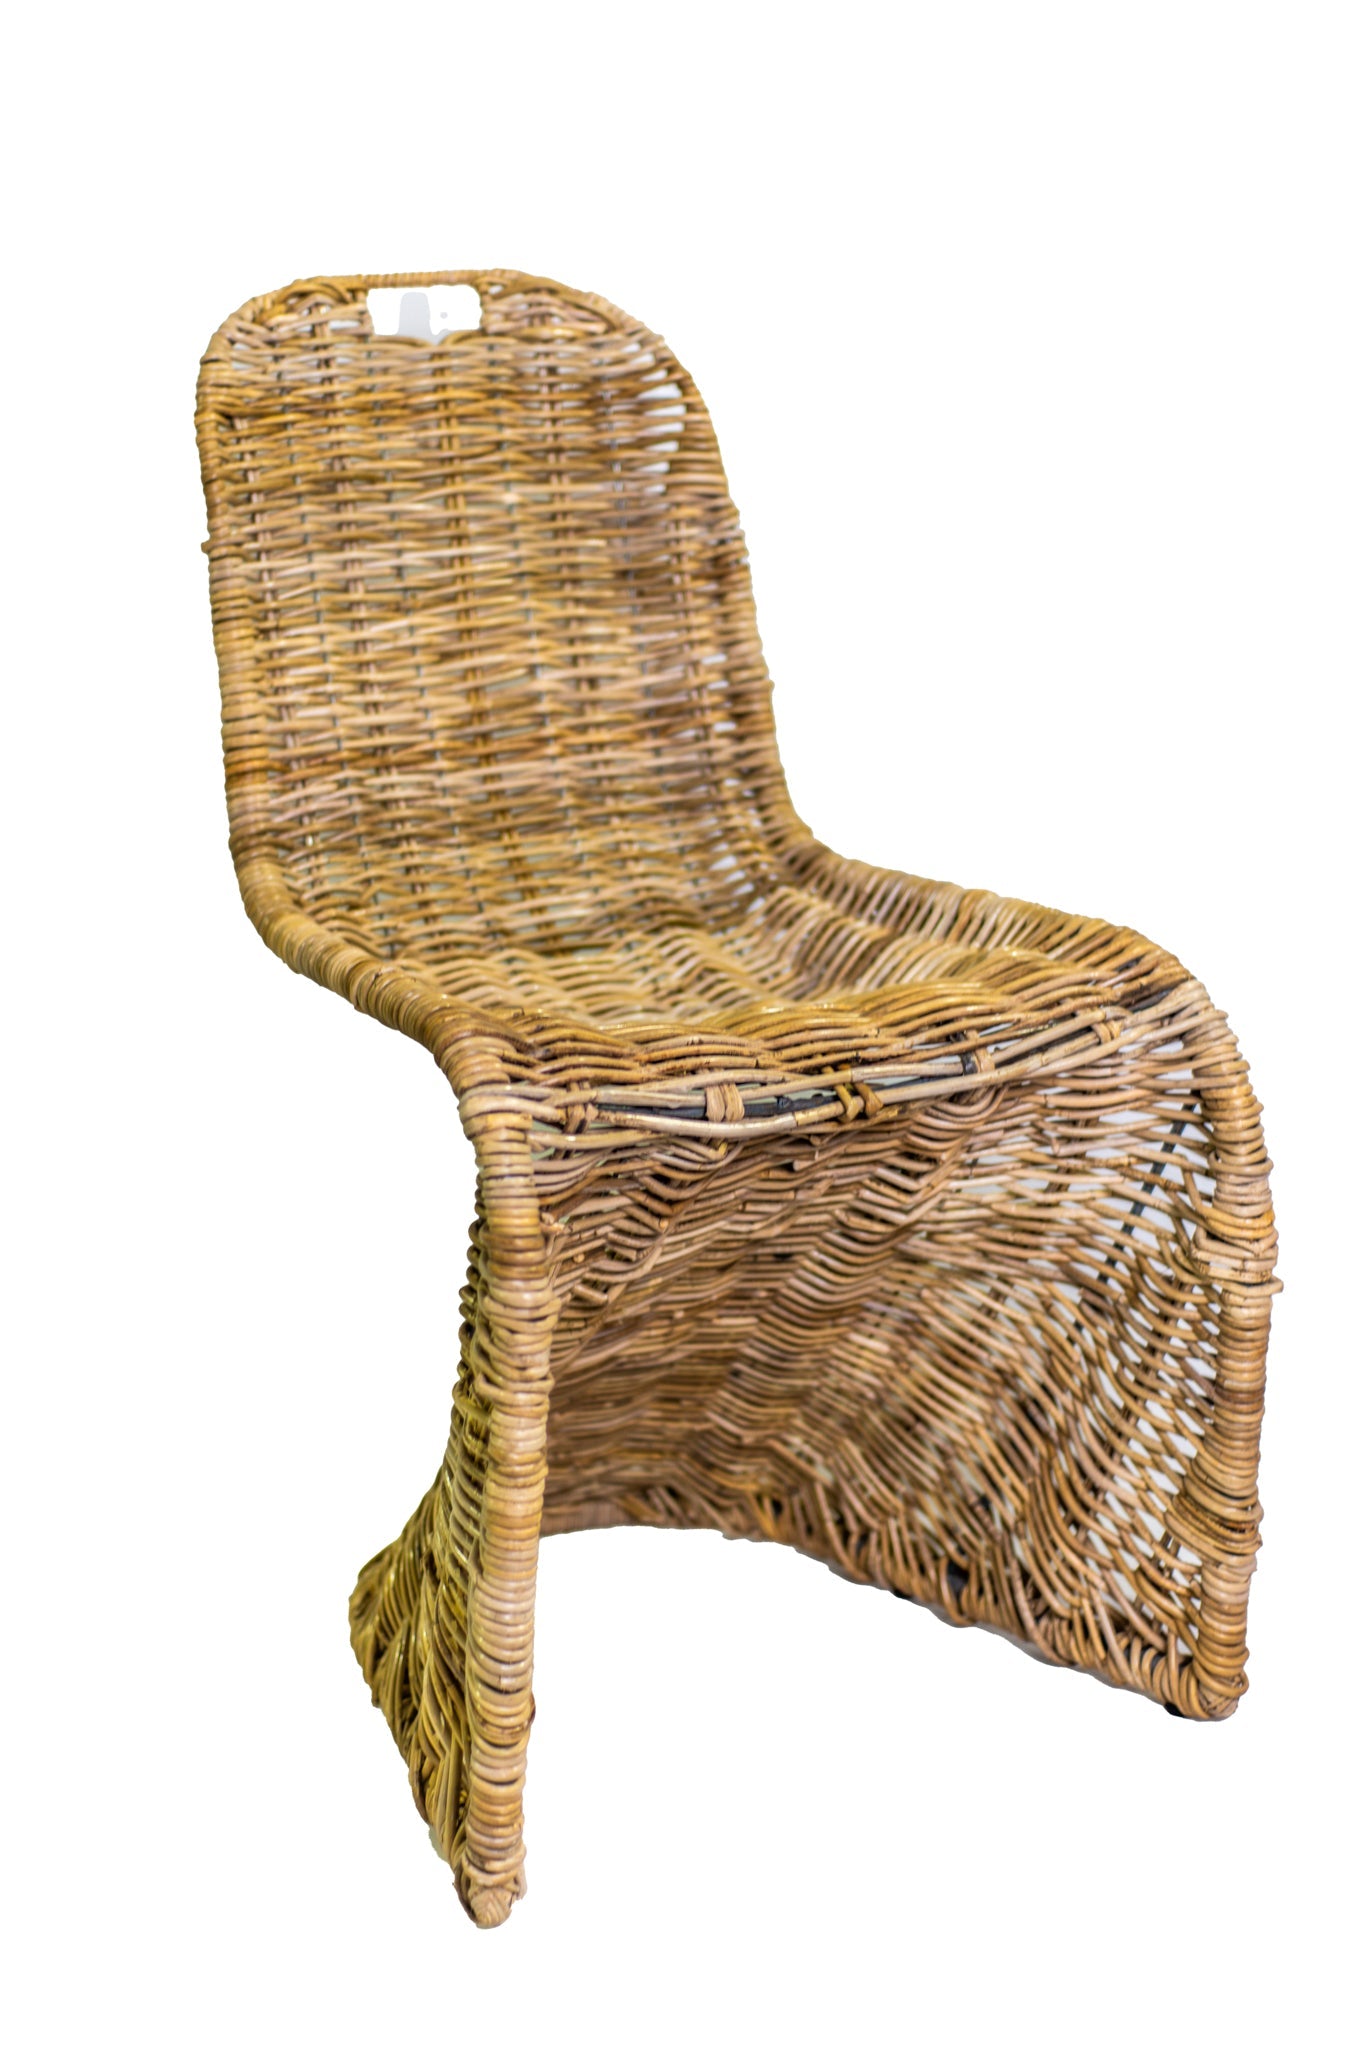 The Beaufort Hand-Woven Rattan and Metal Chair